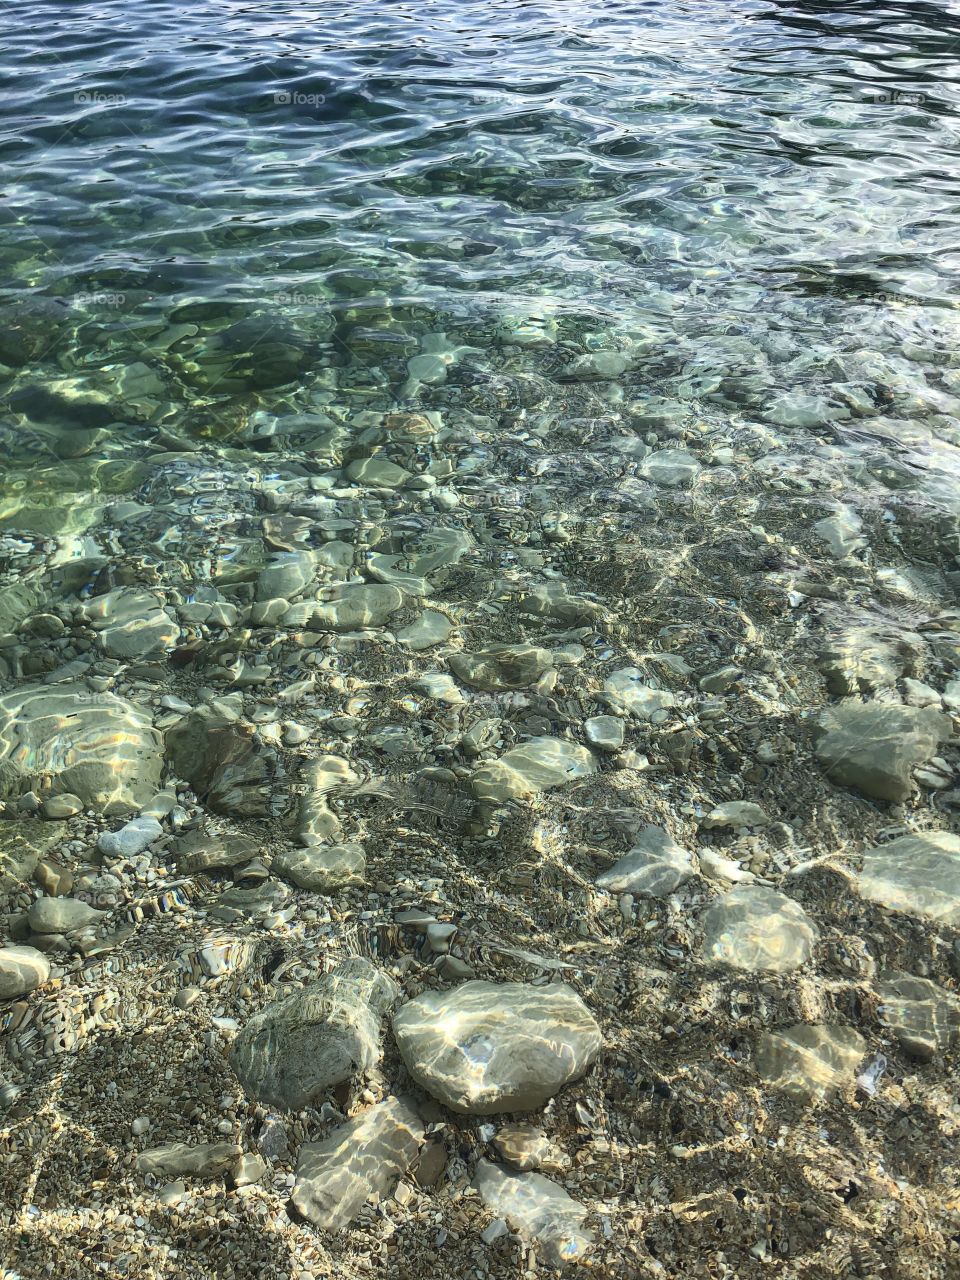 Crystal clear water, so translucent you can practically see your face in it! 